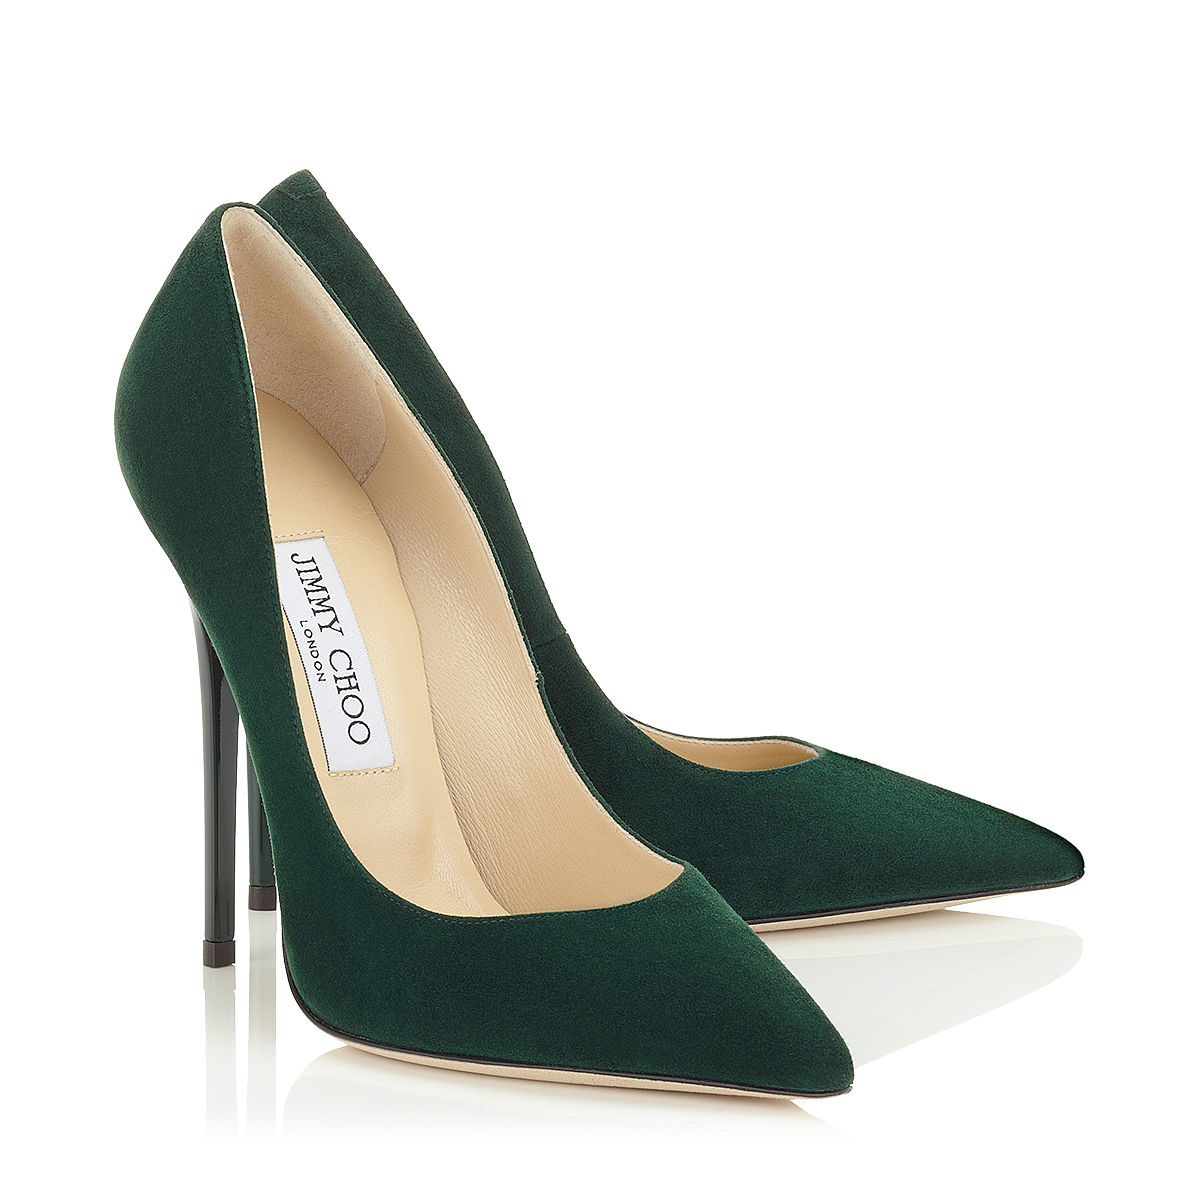 JIMMY CHOO ANOUK EVERGREEN SUEDE - Reed Fashion Blog